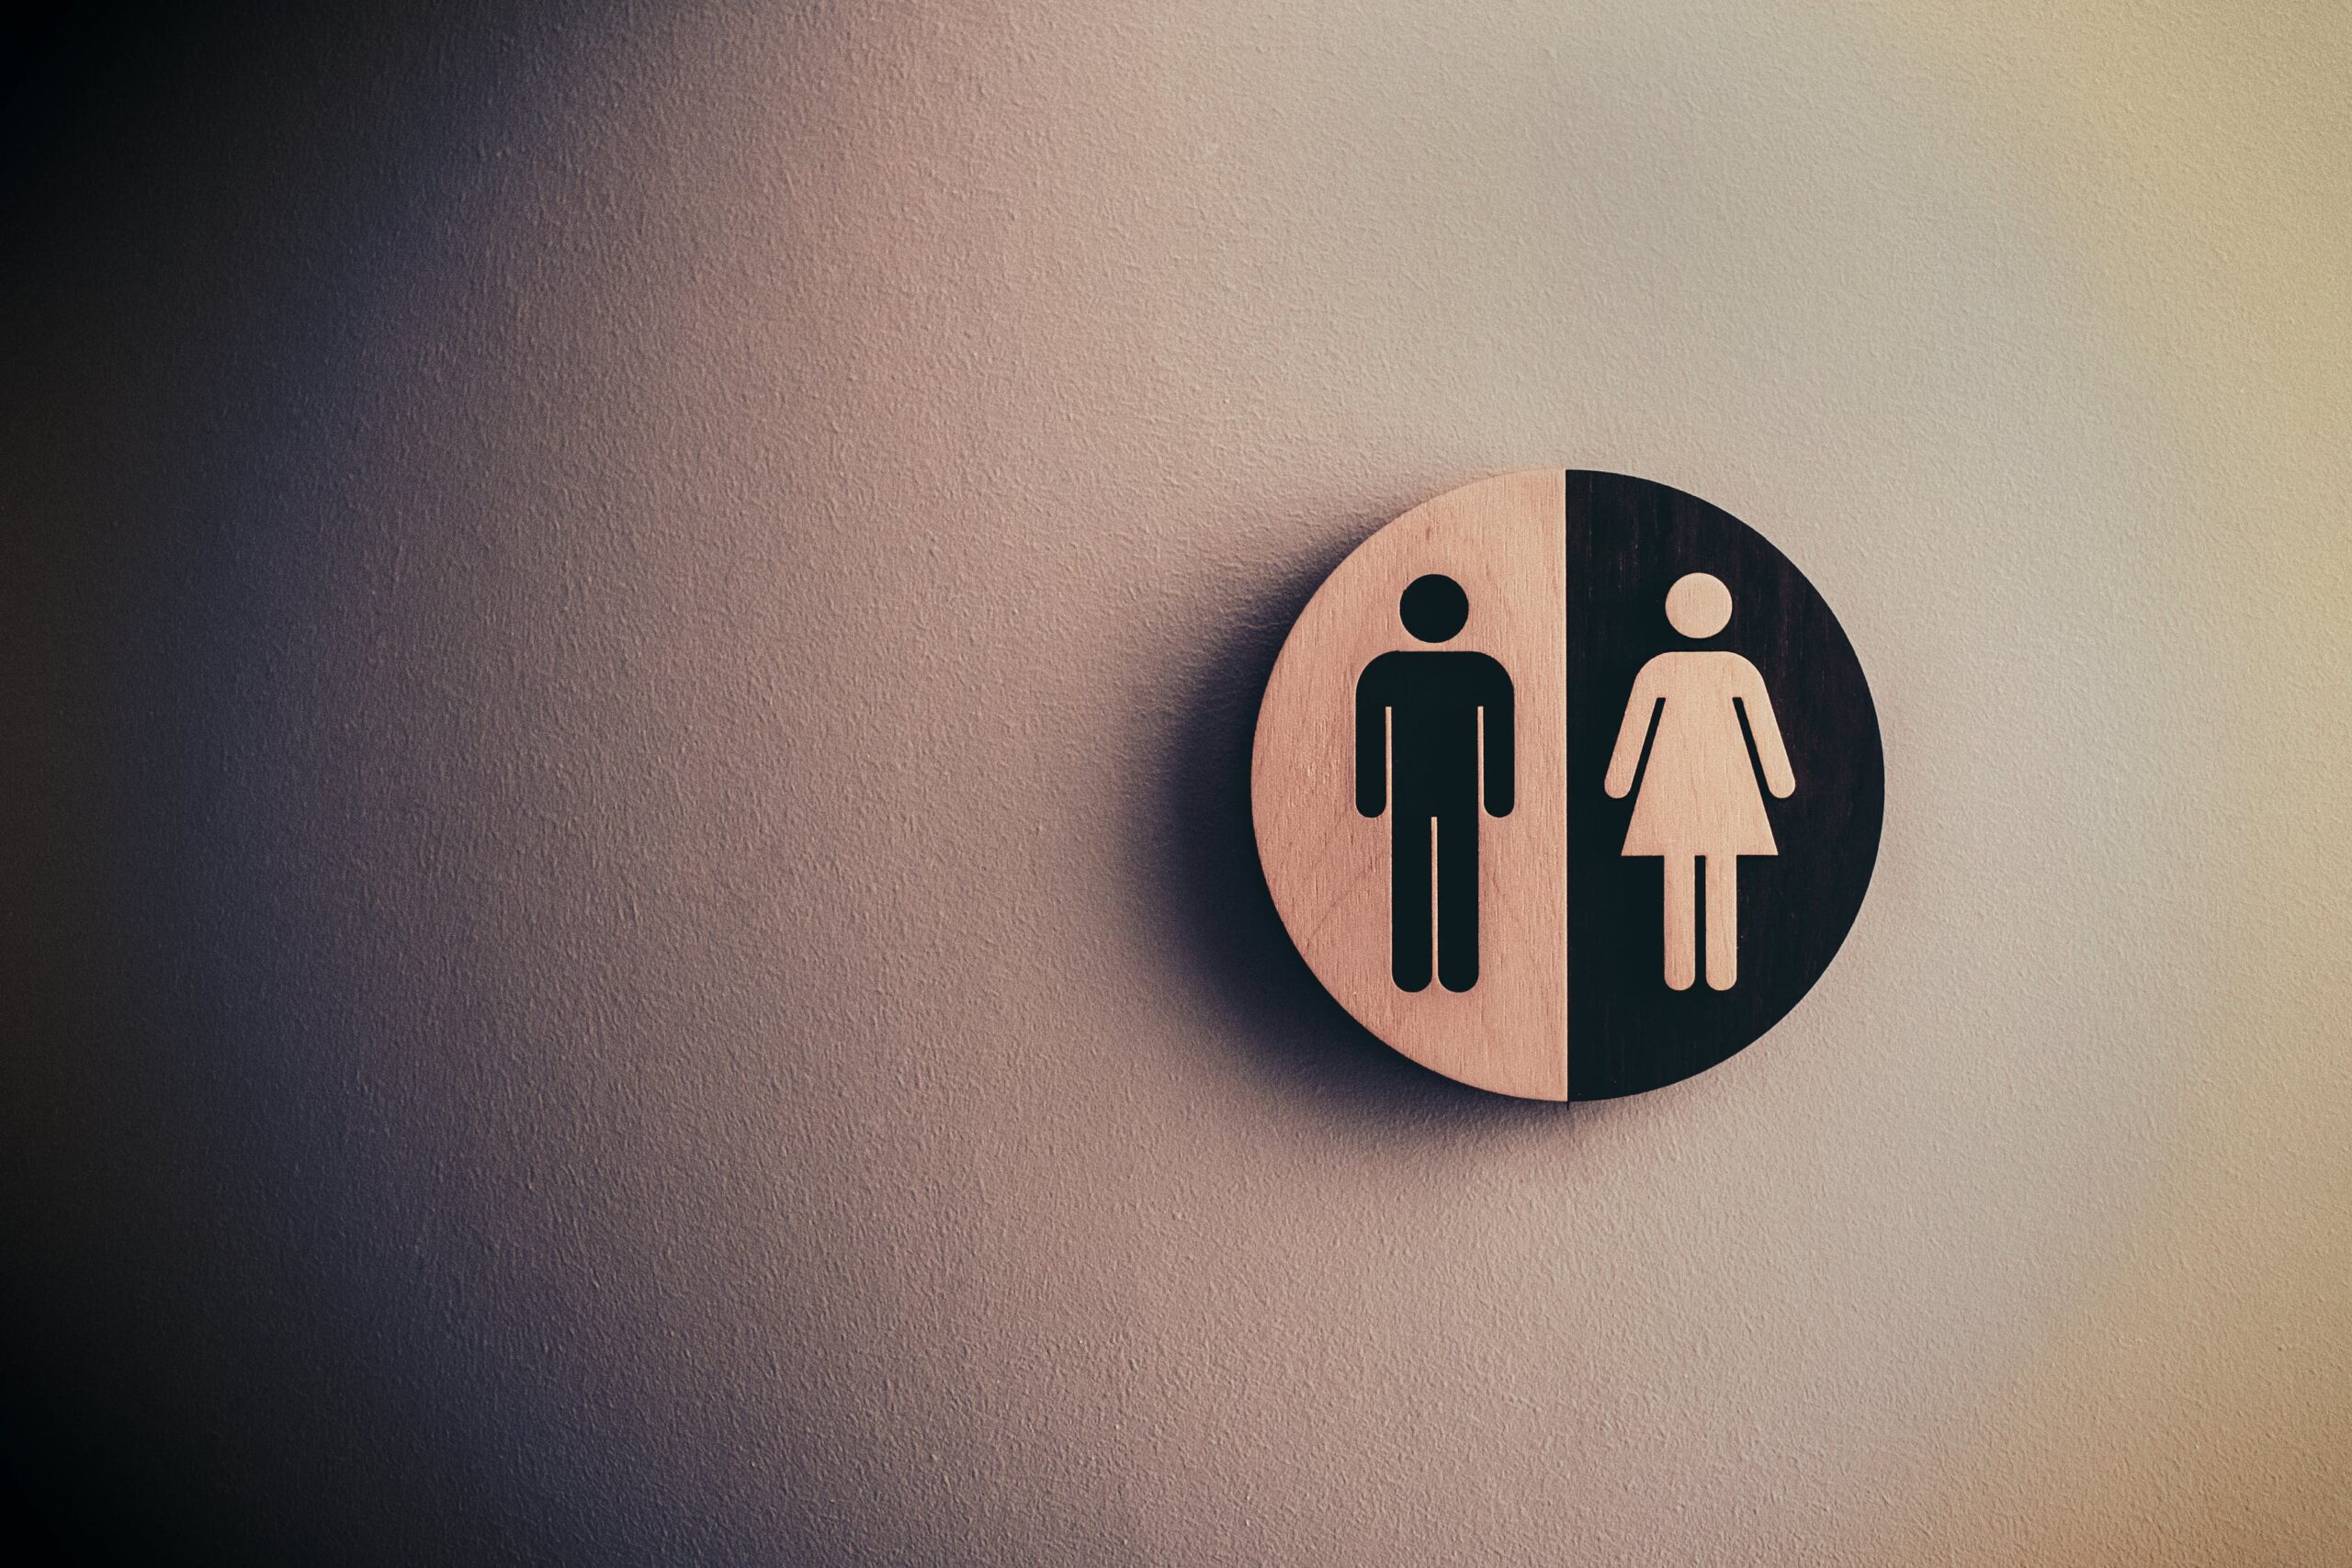 A circular wooden bathroom sign with a black-and-white motif depicting a male on the left half and female on the right half.